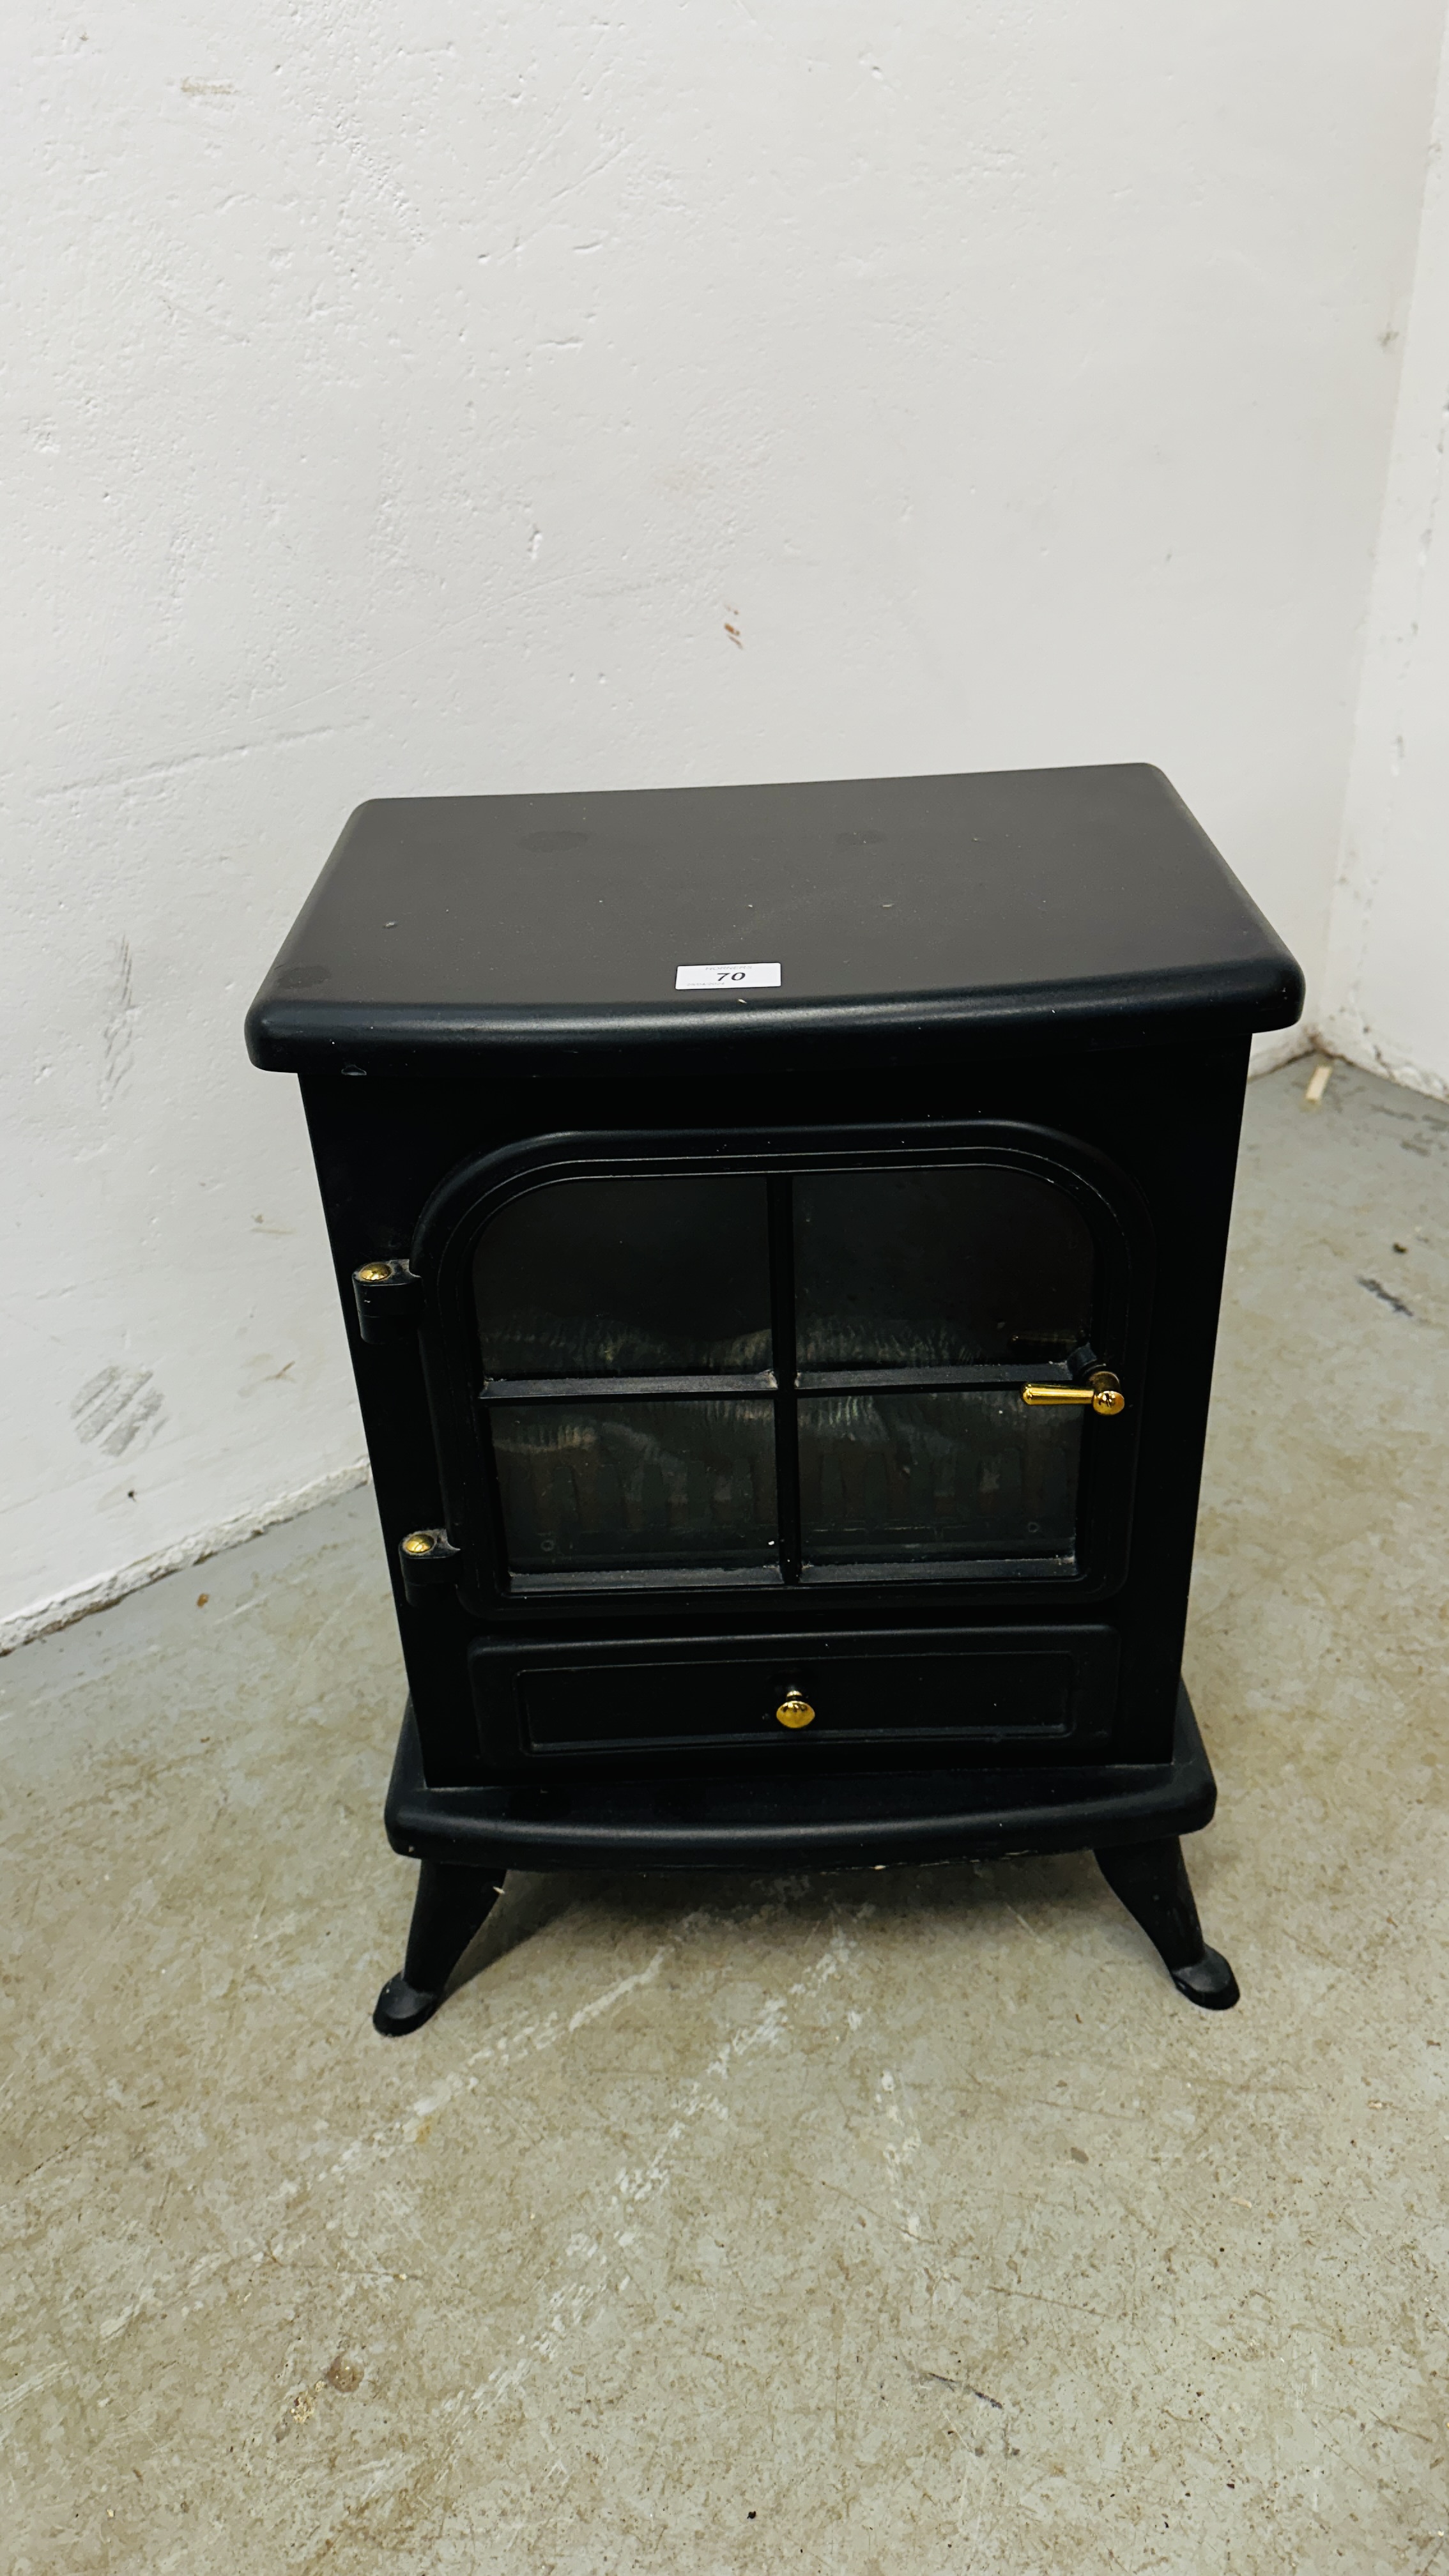 SOLID FUEL EFFECT ELECTRIC ROOM HEATER - SOLD AS SEEN.